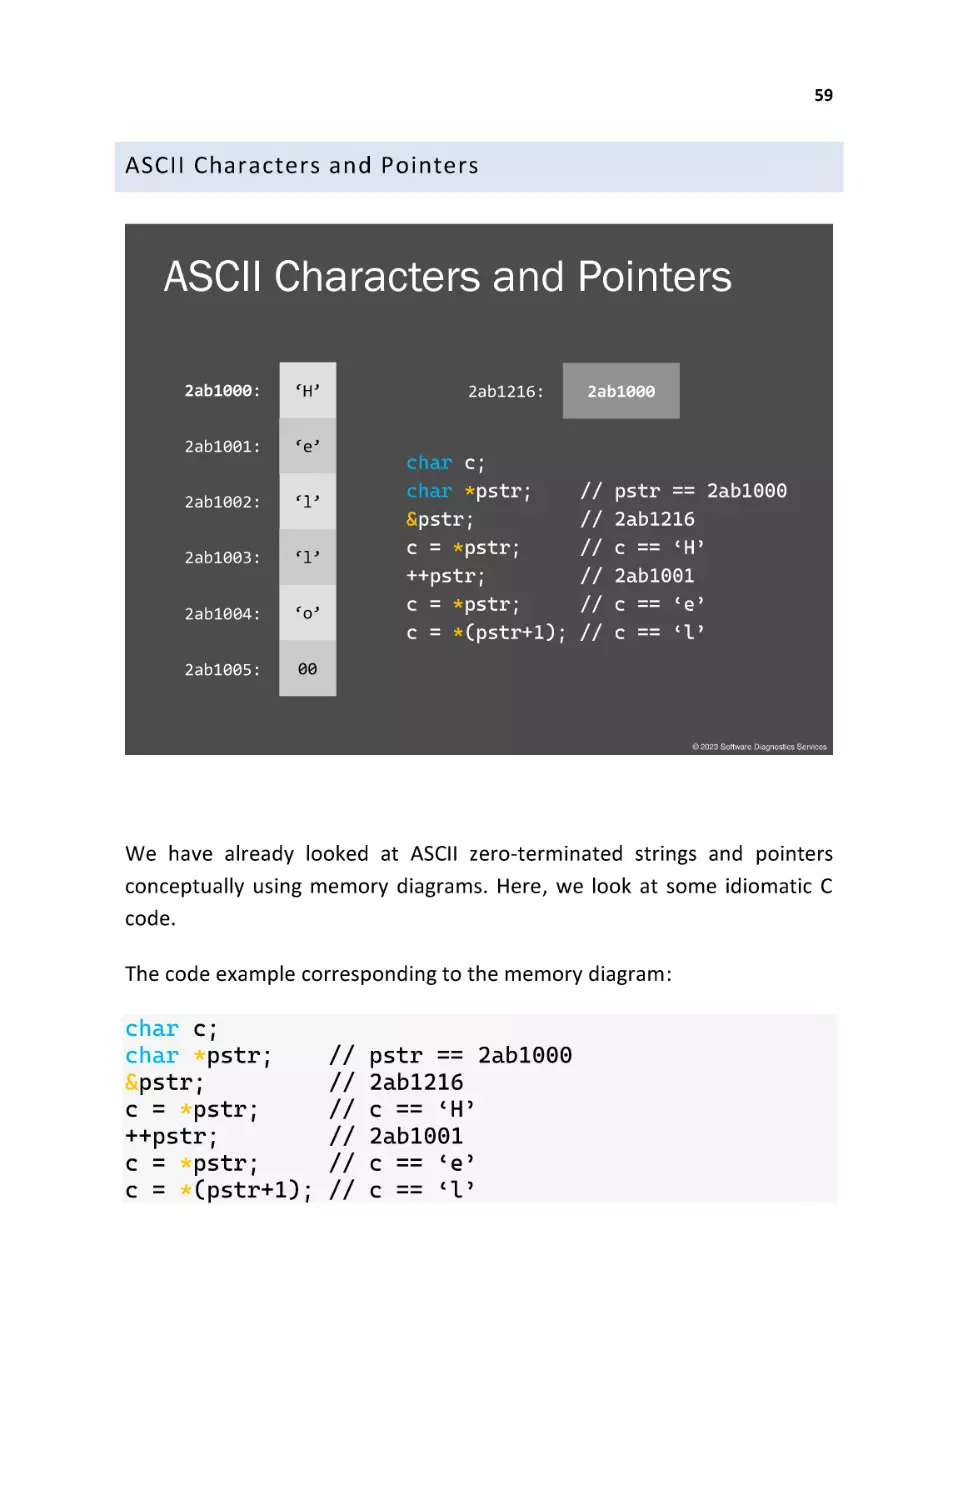 ASCII Characters and Pointers